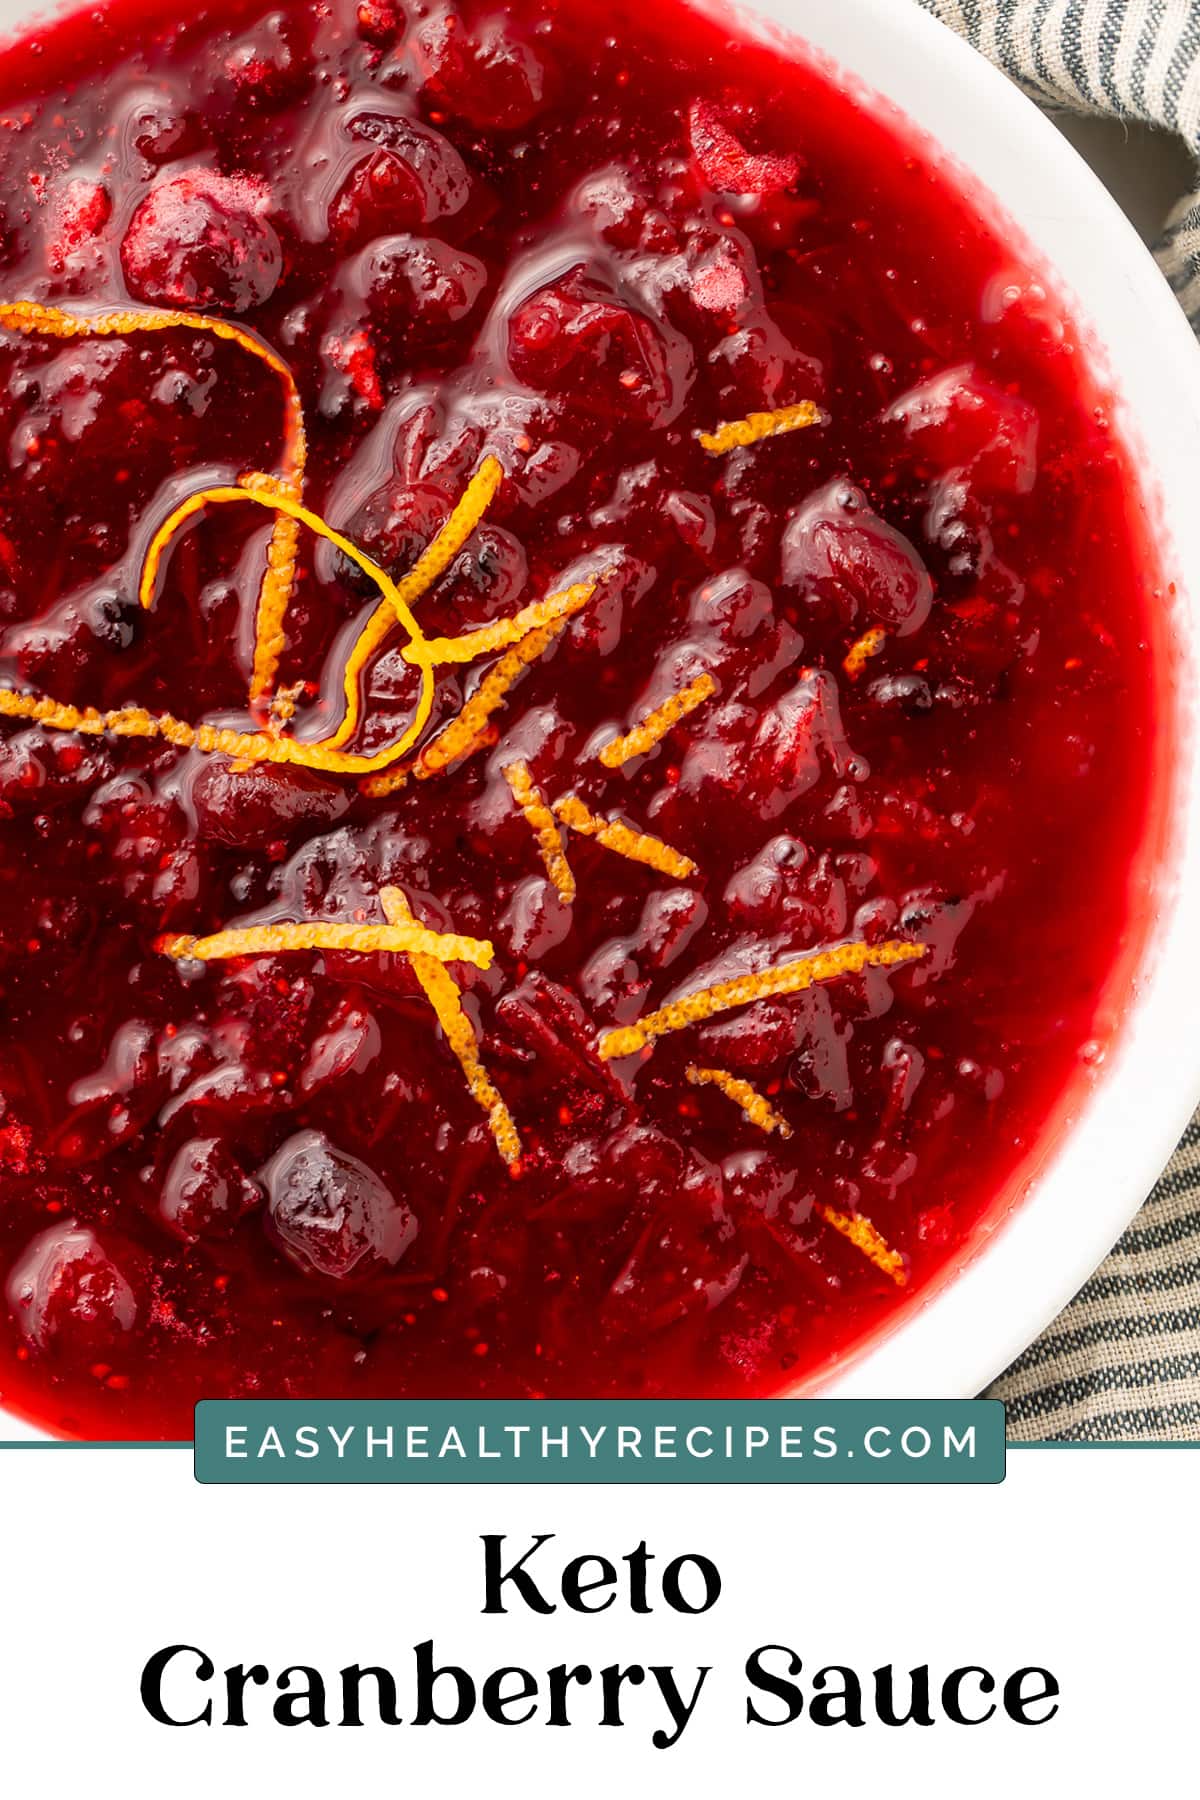 Graphic for keto cranberry sauce.